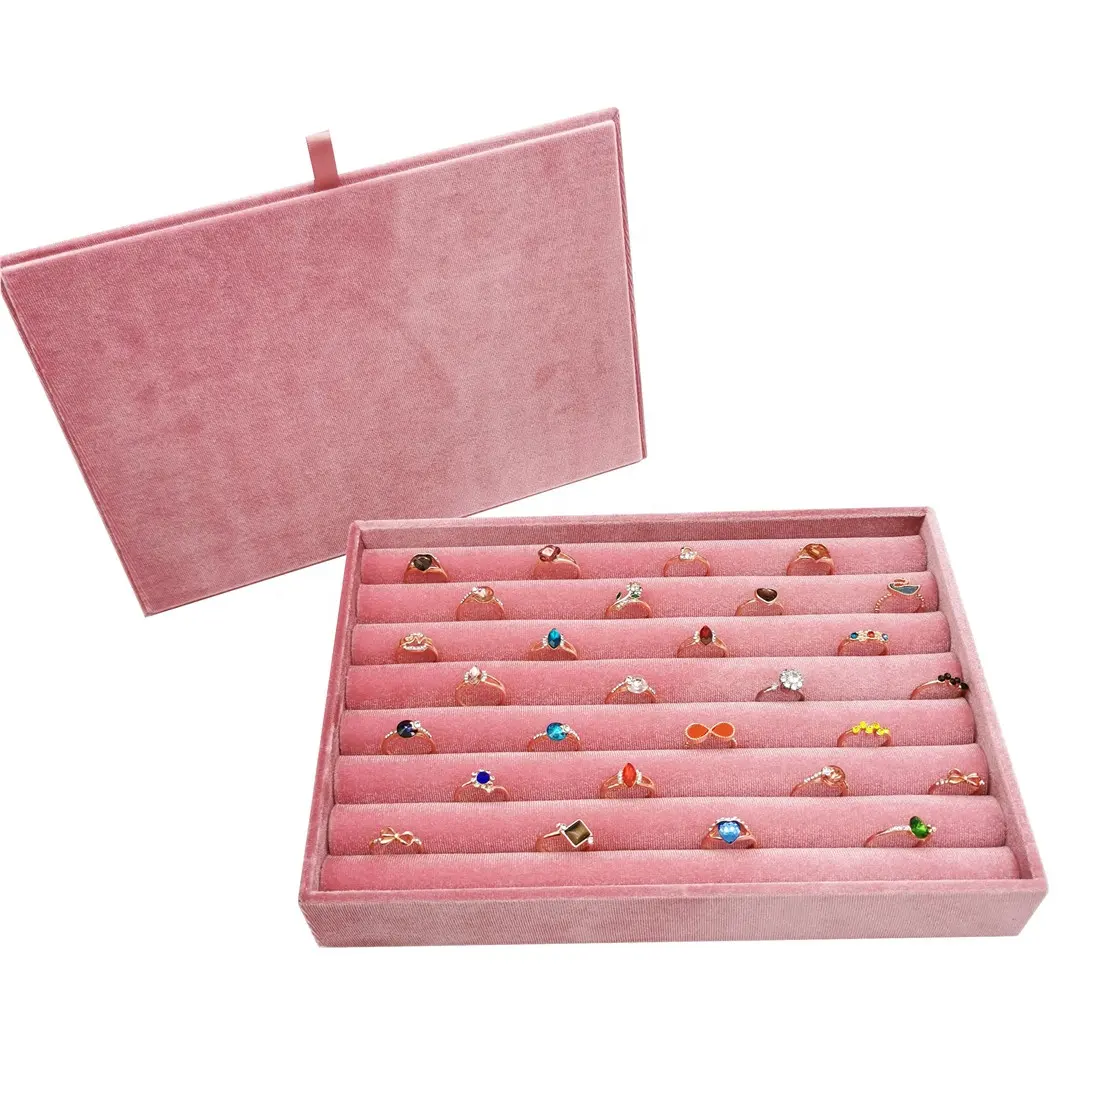 Ring Display Box Wholesale Jewelry Ring SLOT Display Box Velvet Ring Packaging Tray Box With Cover Stackable